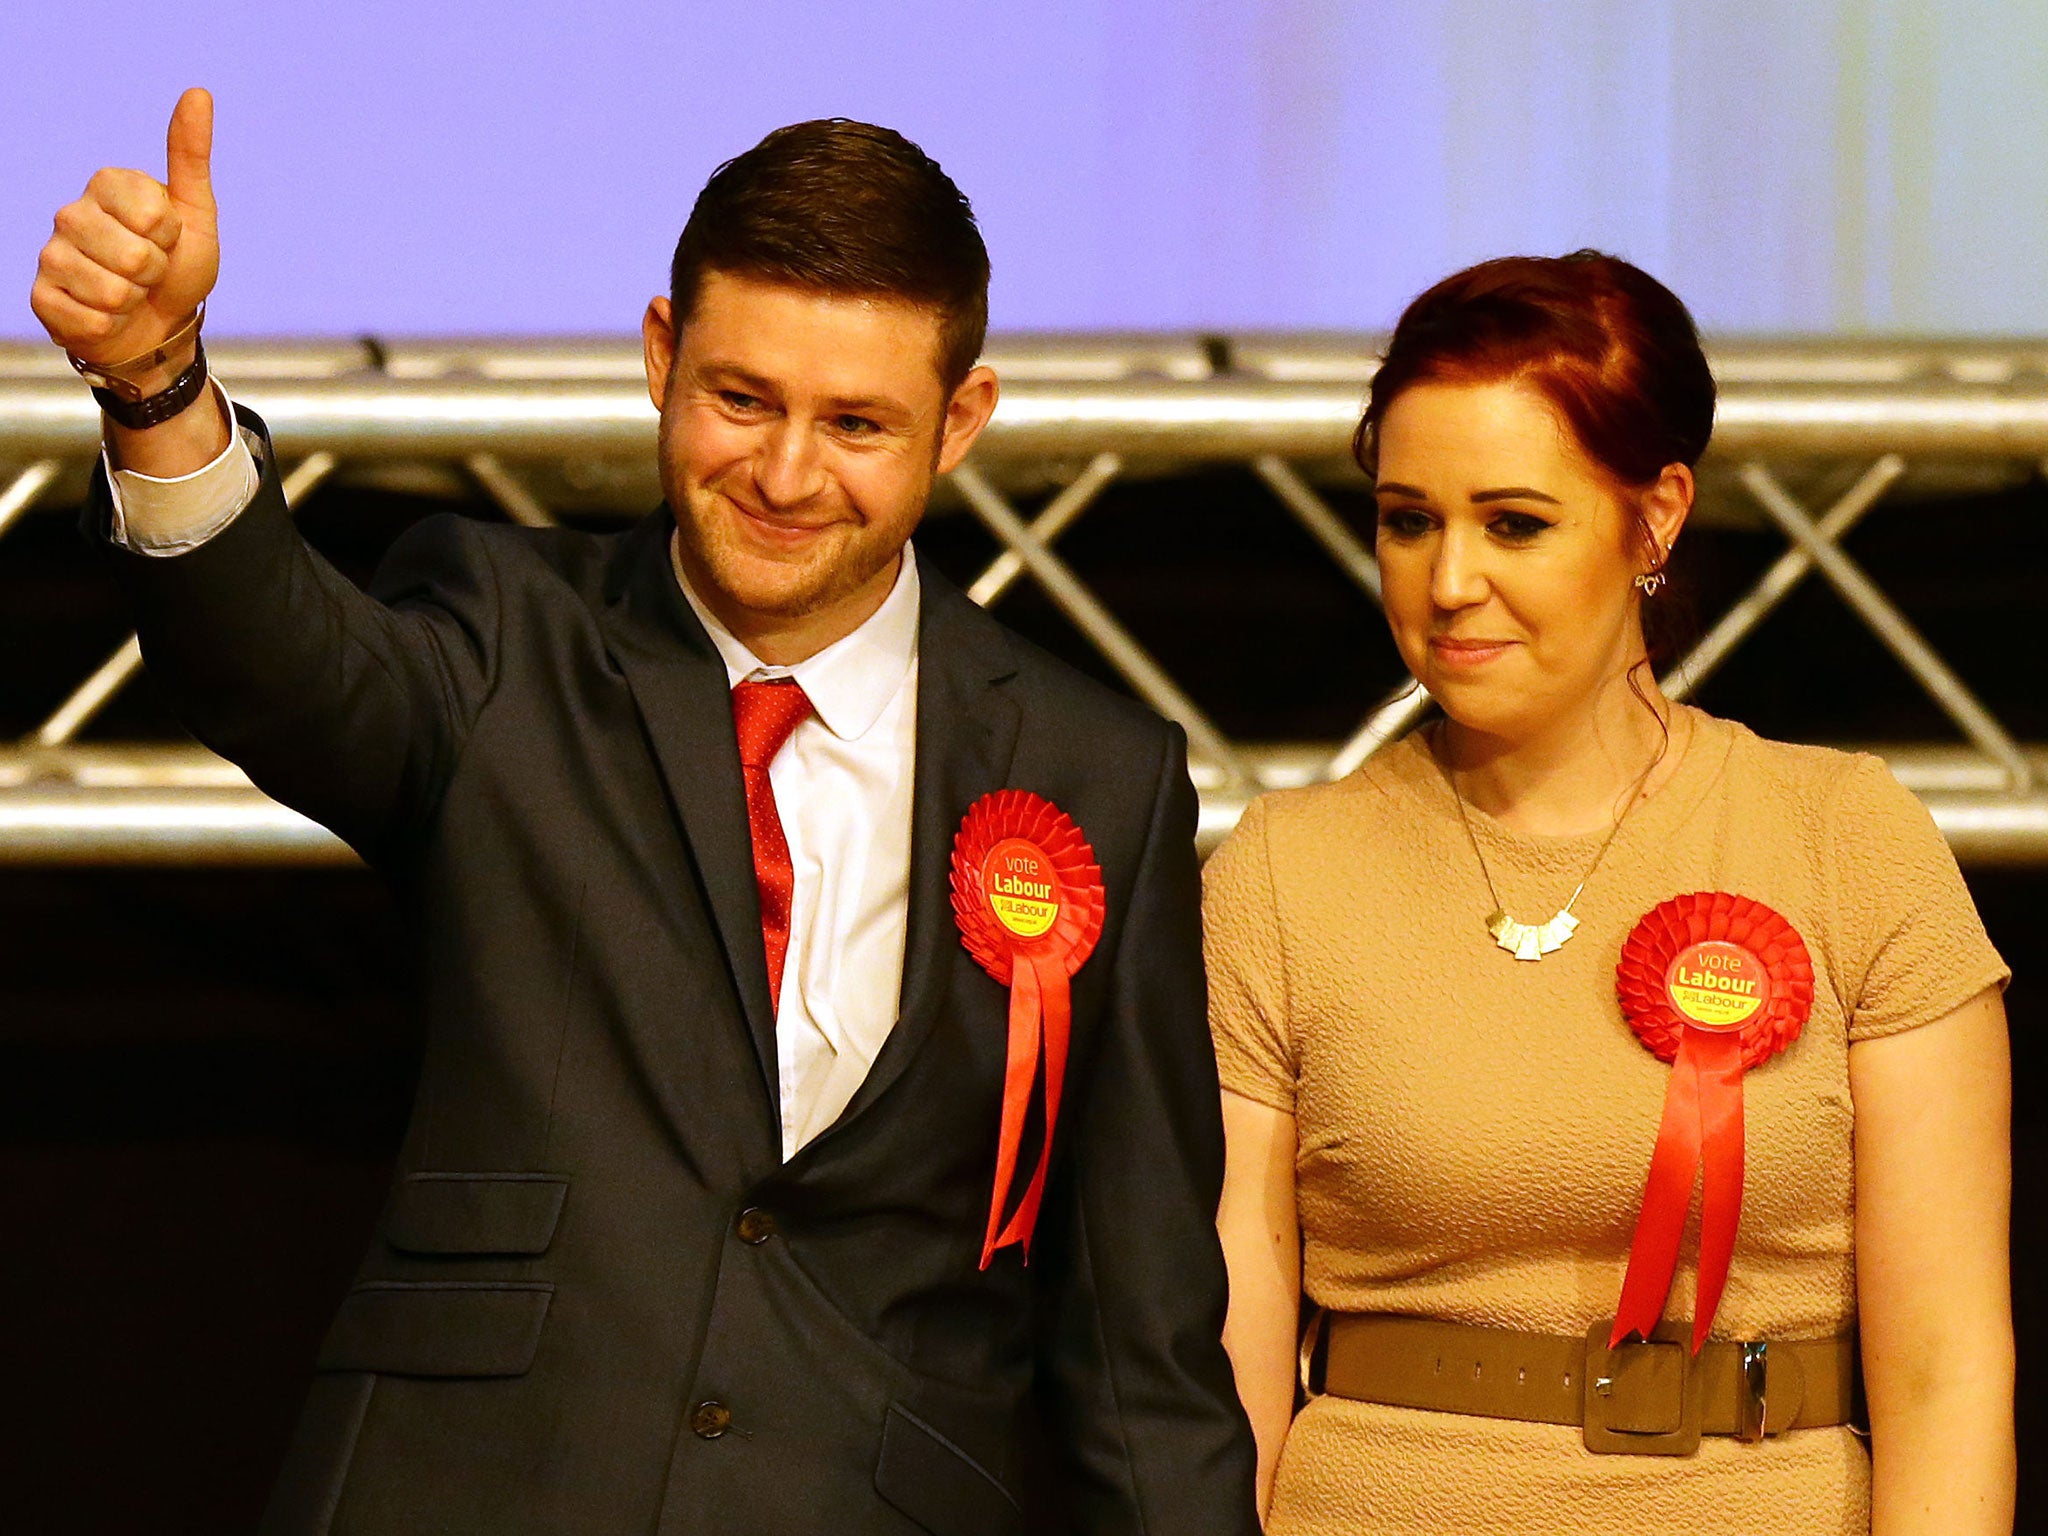 Victorious Labour candidate Jim McMahon with his partner Charlene after winning the Oldham West and Royton by-election